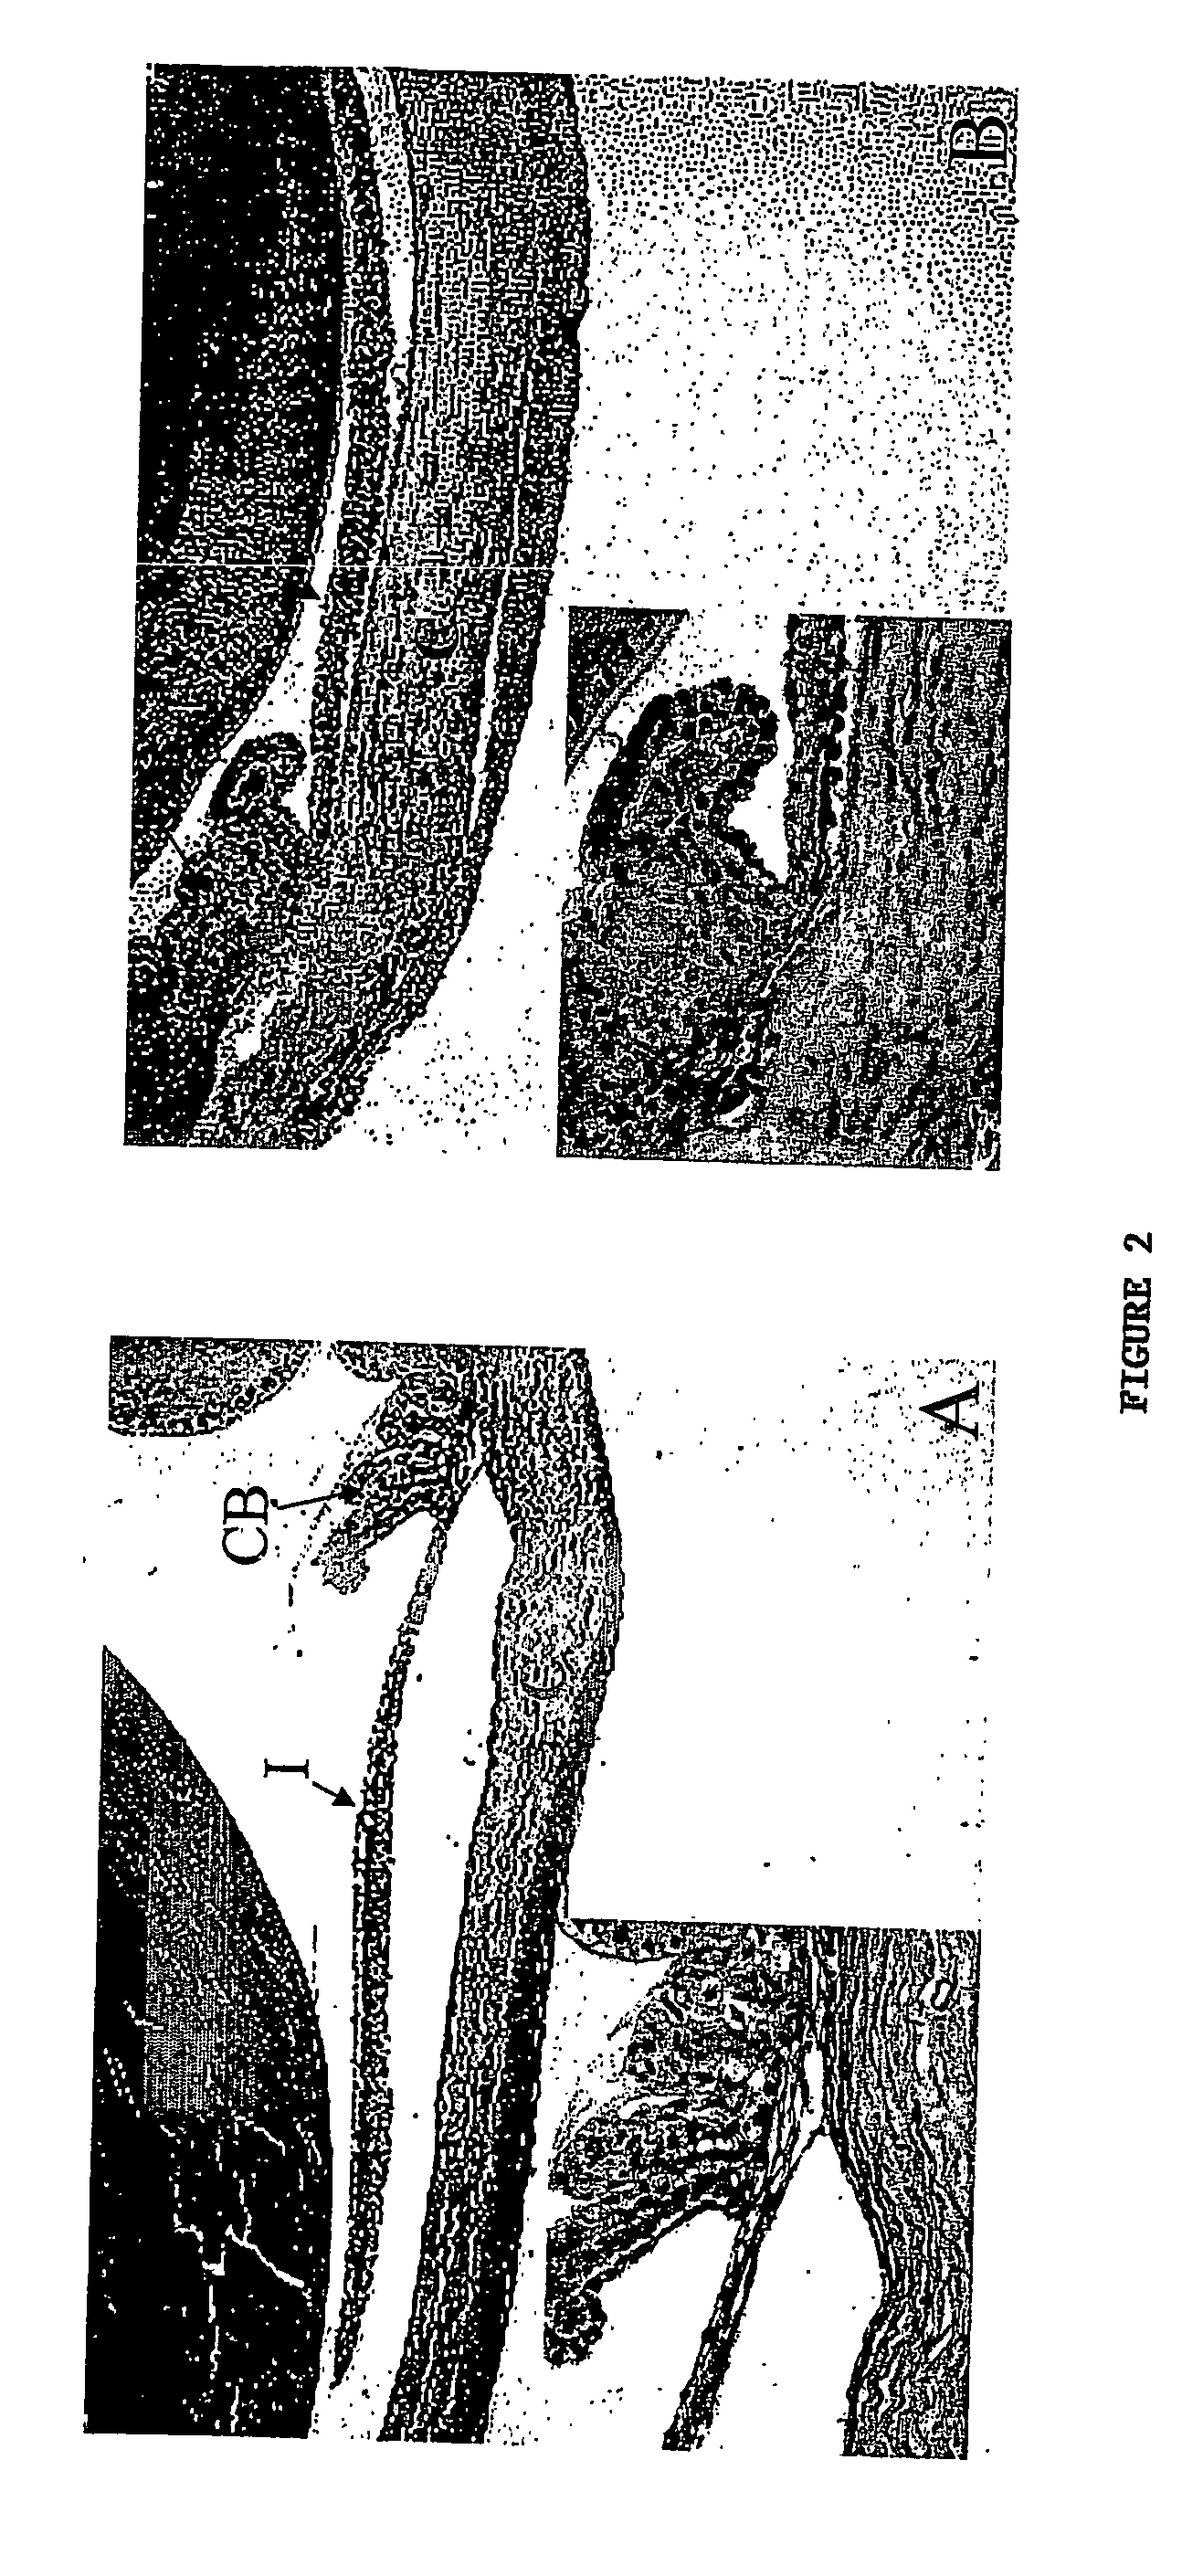 Methods for Treating Ocular Inflammation by Neutralizing Cxcl10 Activity